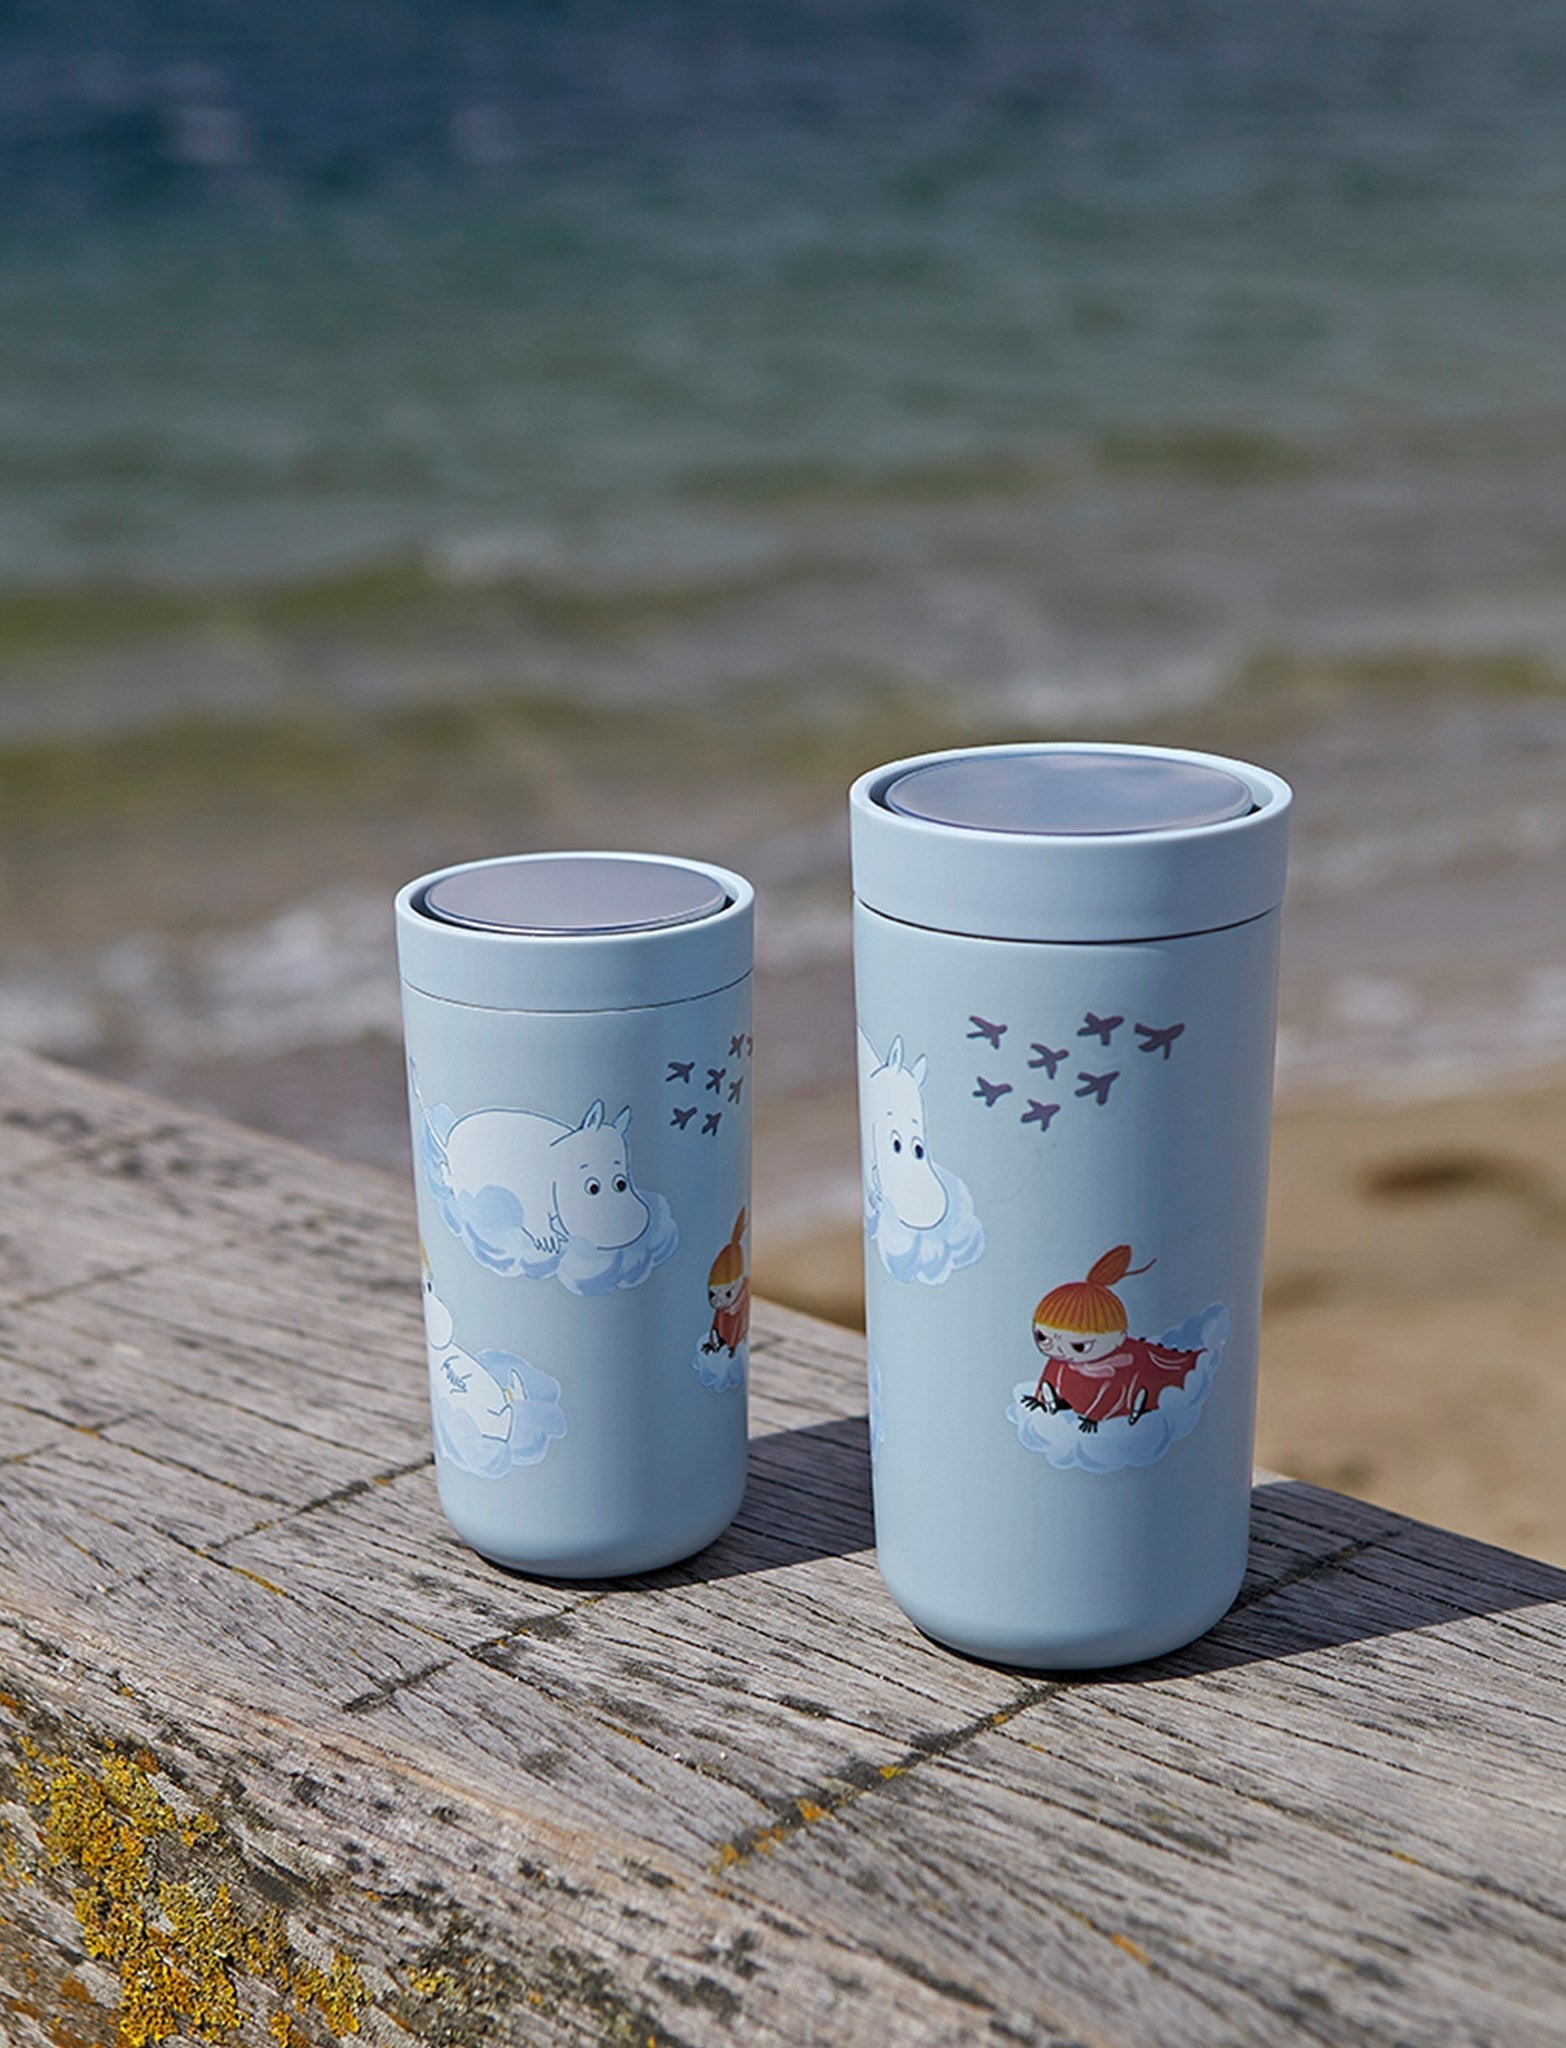 Stelton To Go Click Thermo Mug 0.2 L, Moomin Soft Cloud